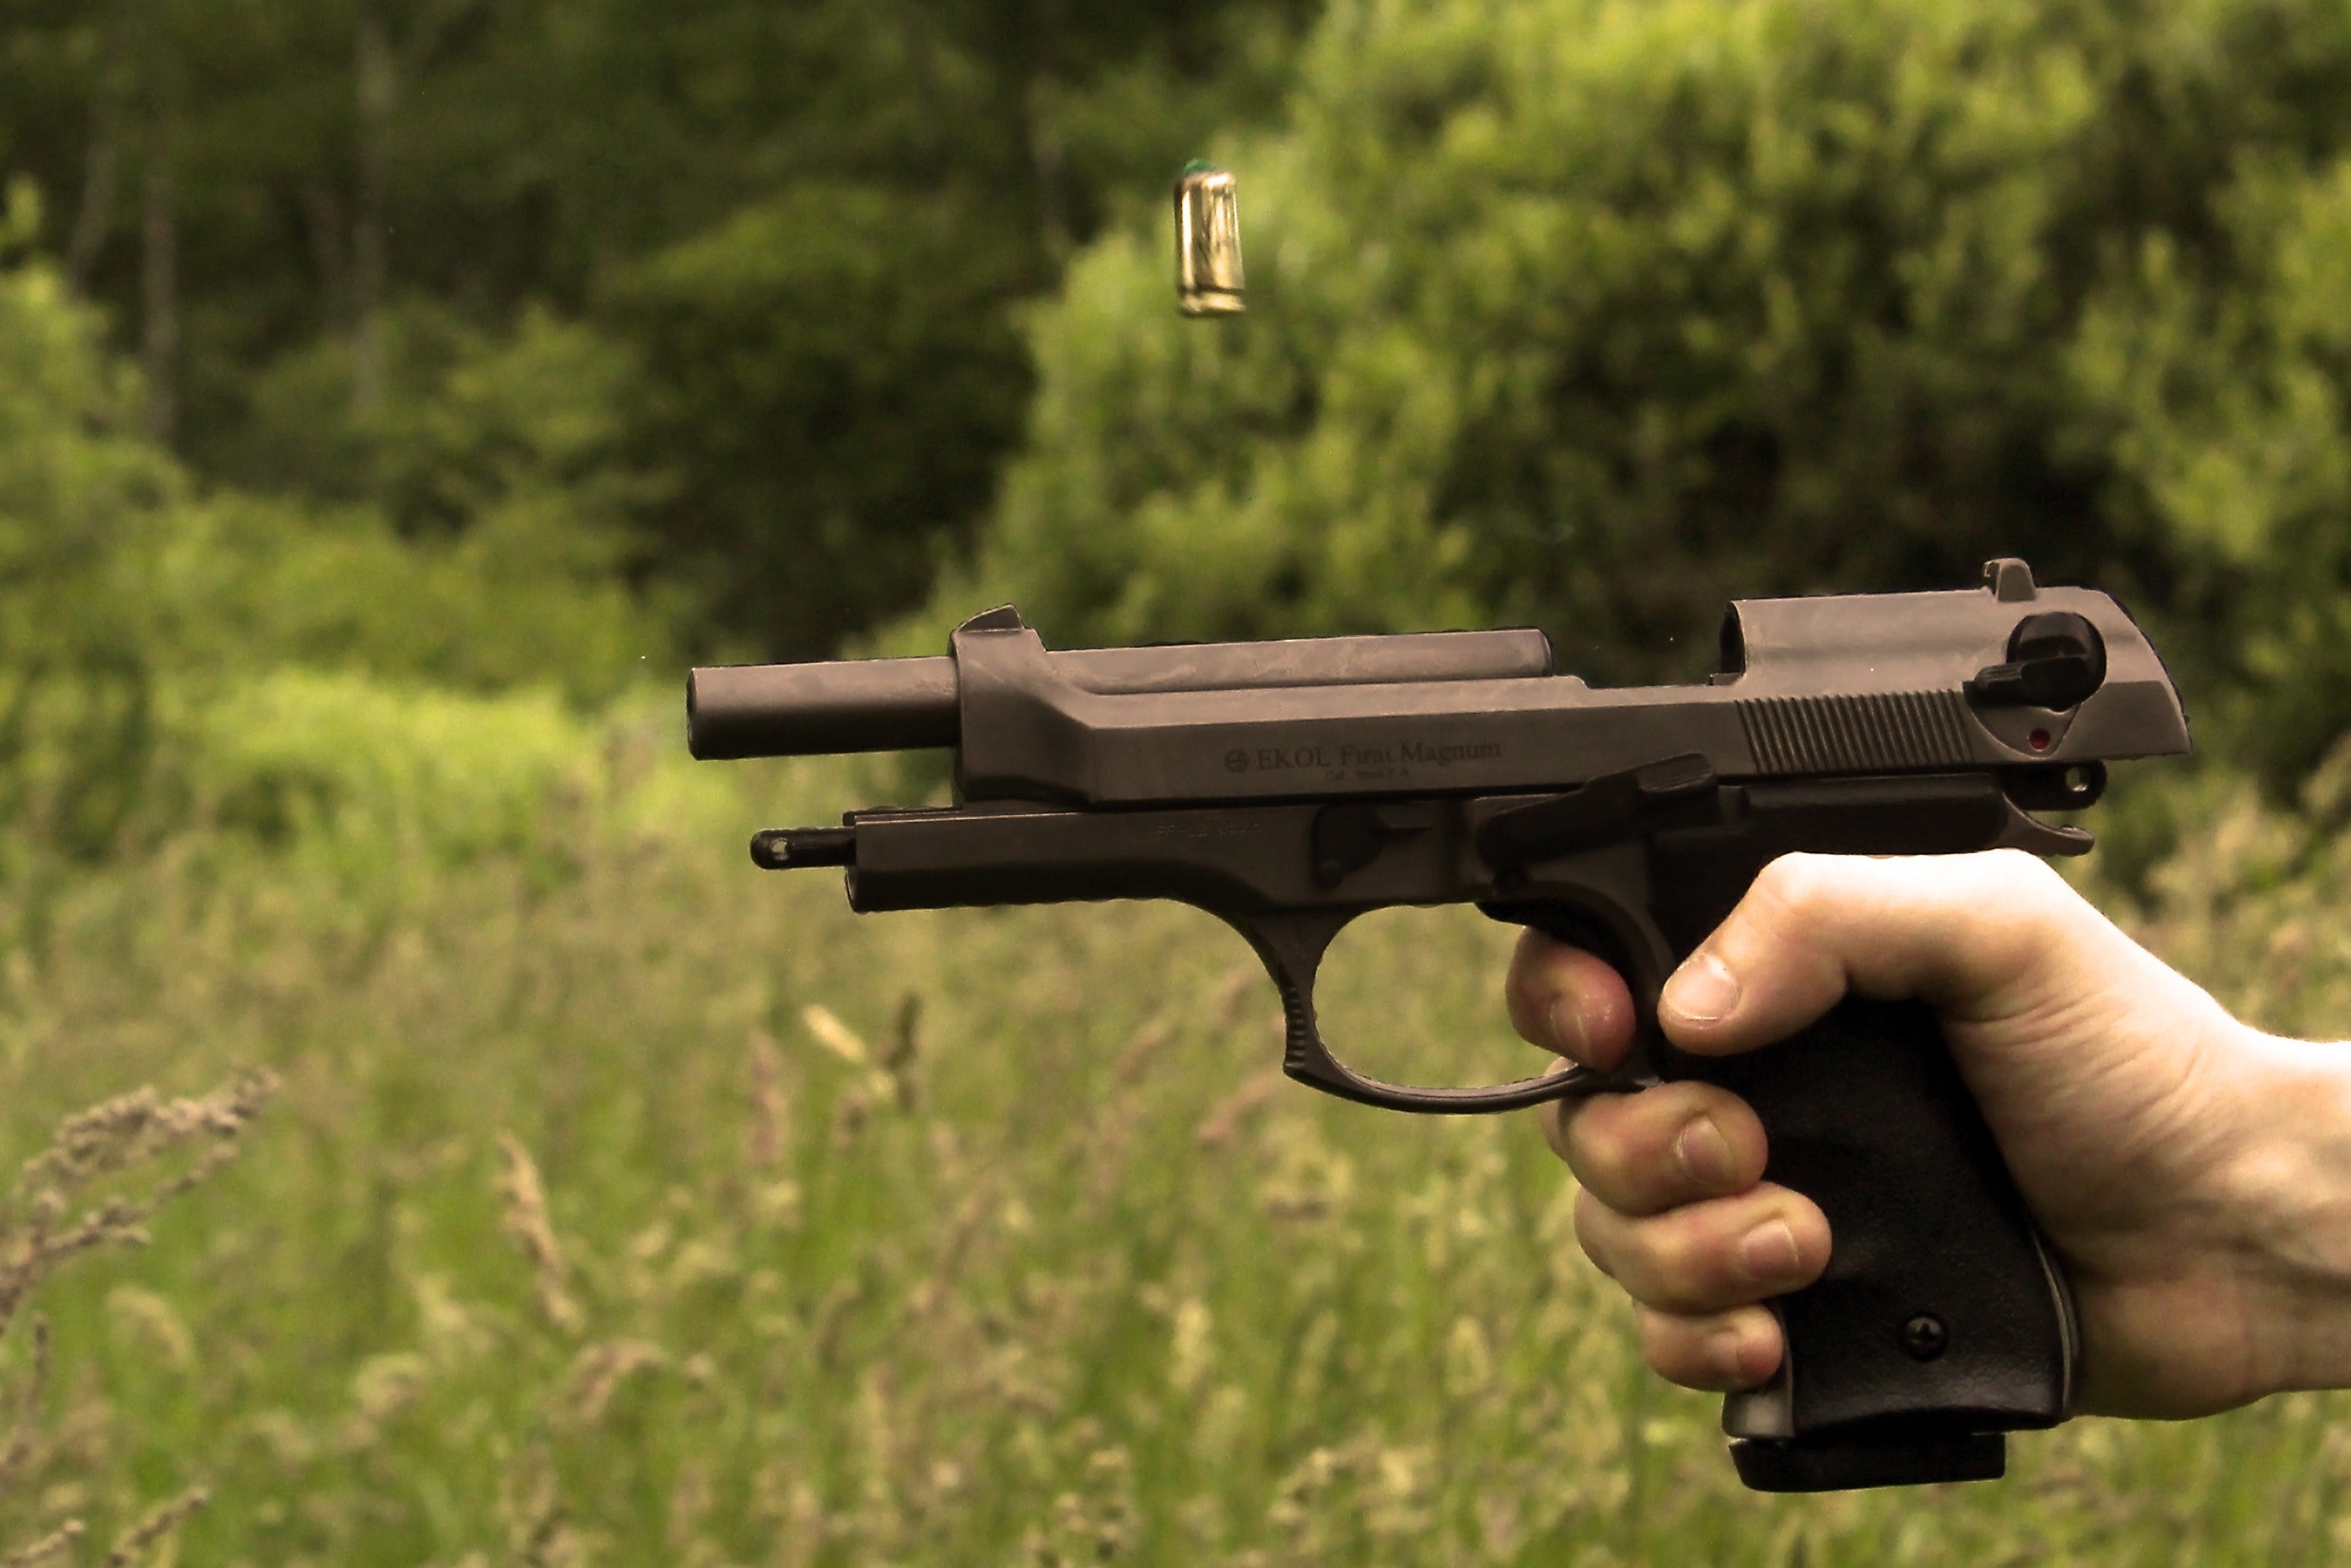 A close-up of a hand illegally possessing a black pistol with a bullet casing ejecting midair, against a blurred green forest background.